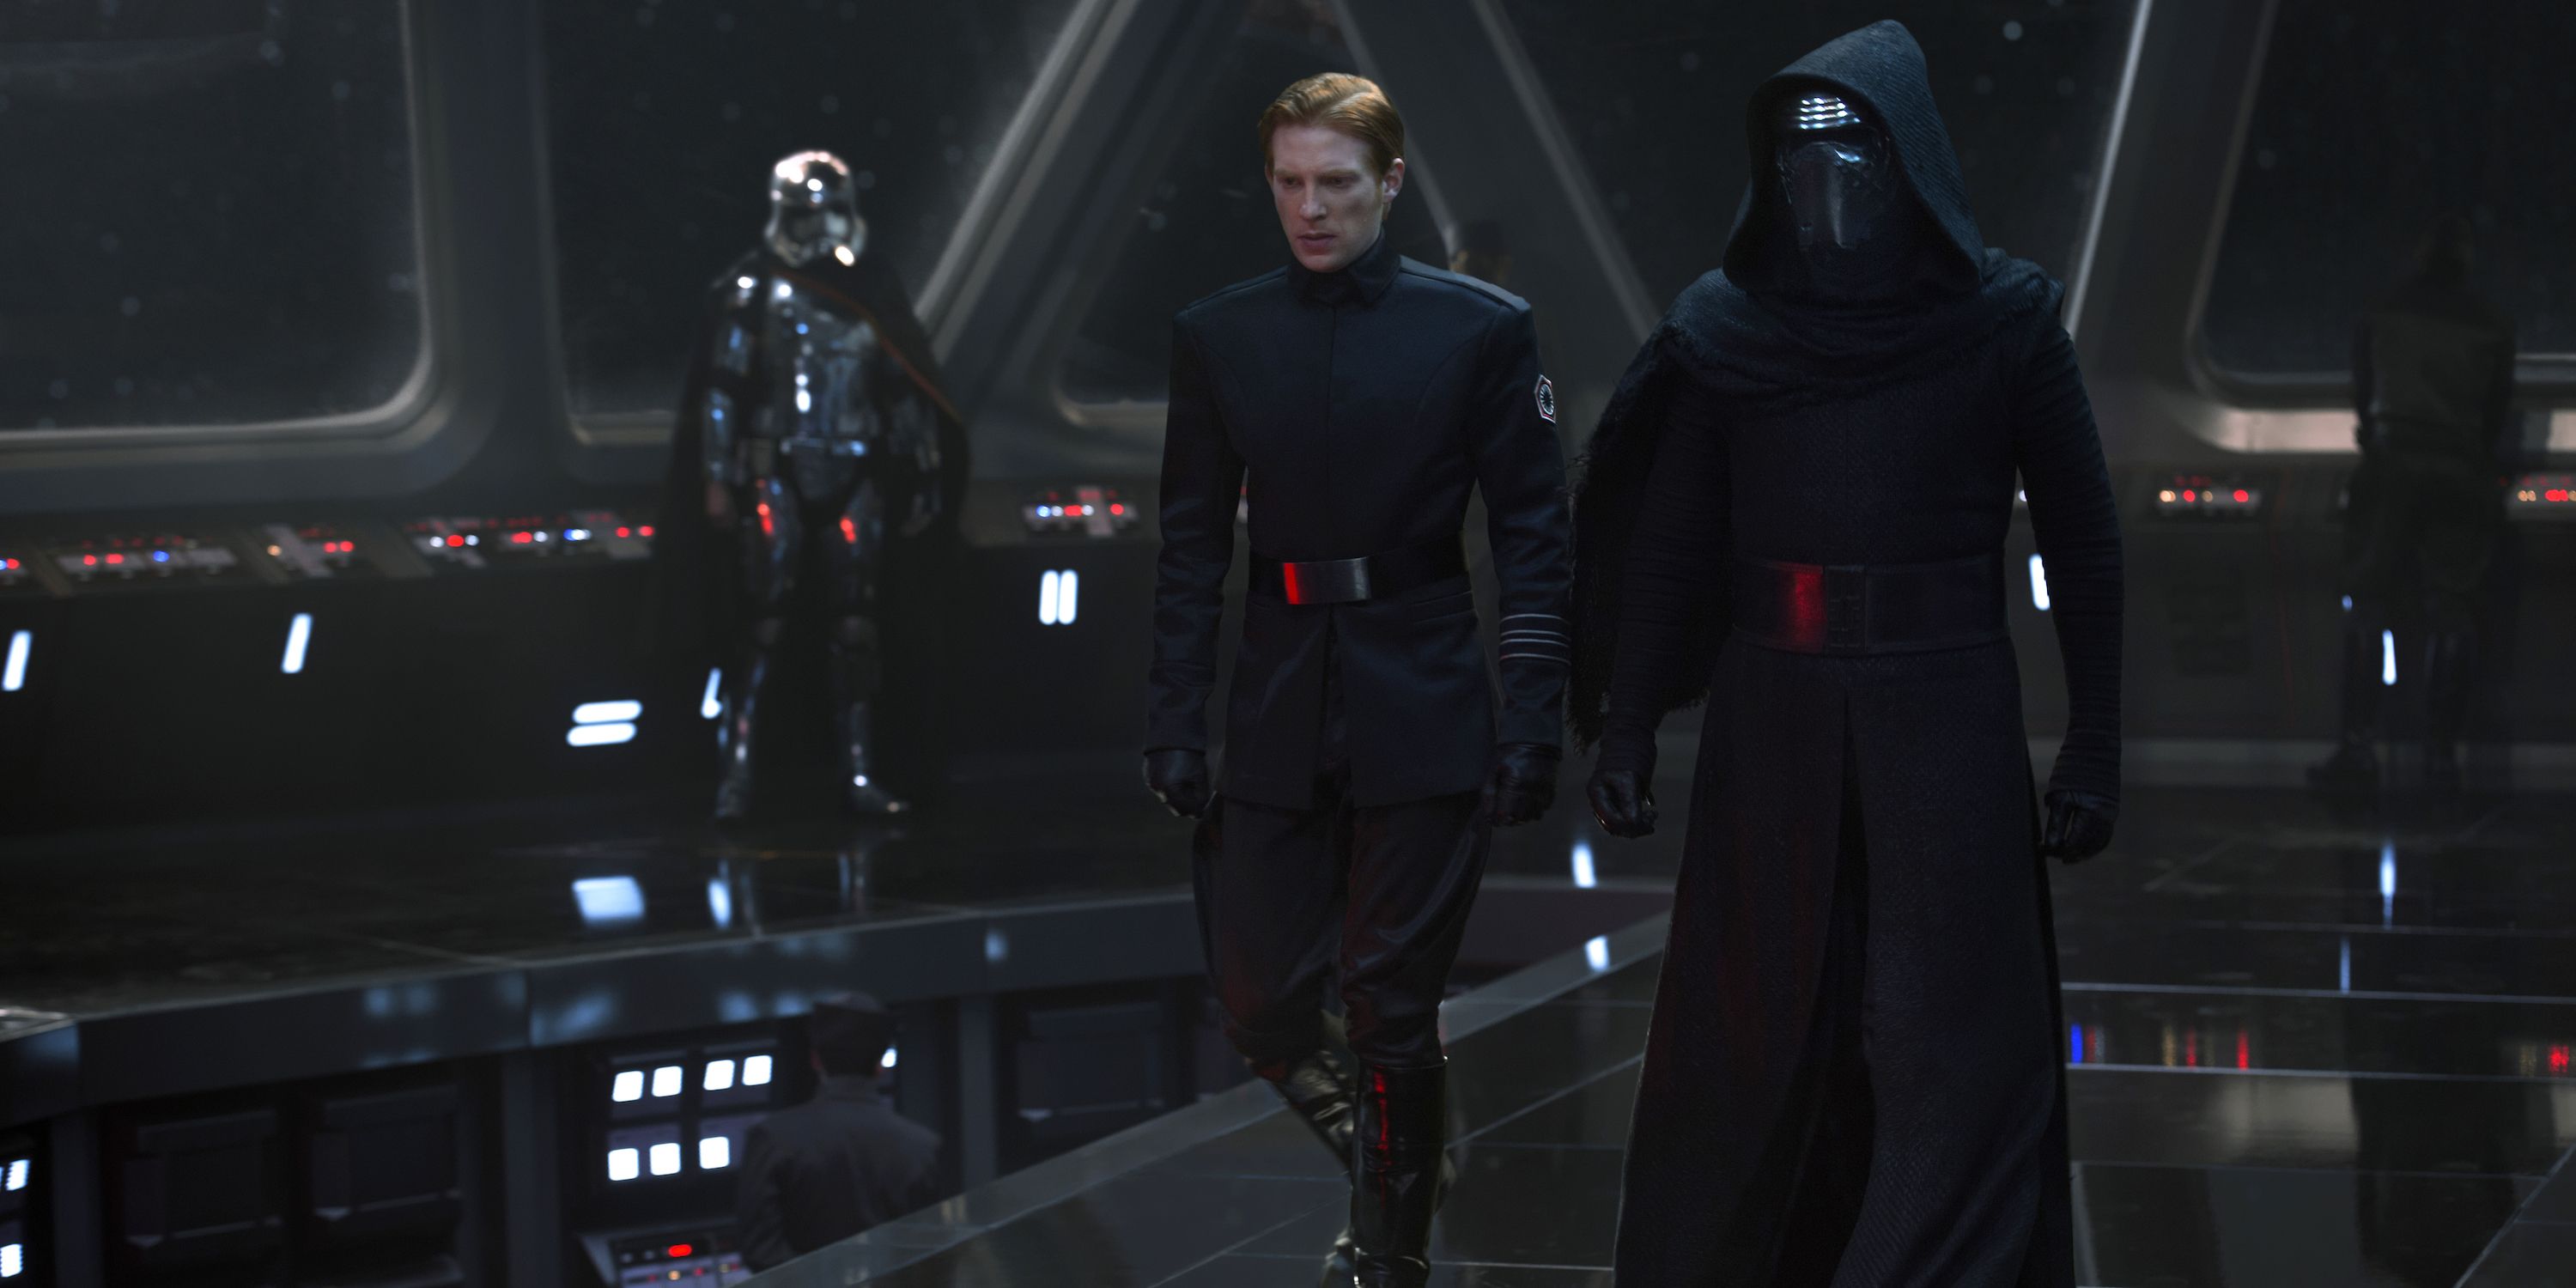 Captain Phasma General Hux and Kylo Ren in Star Wars The Force Awakens